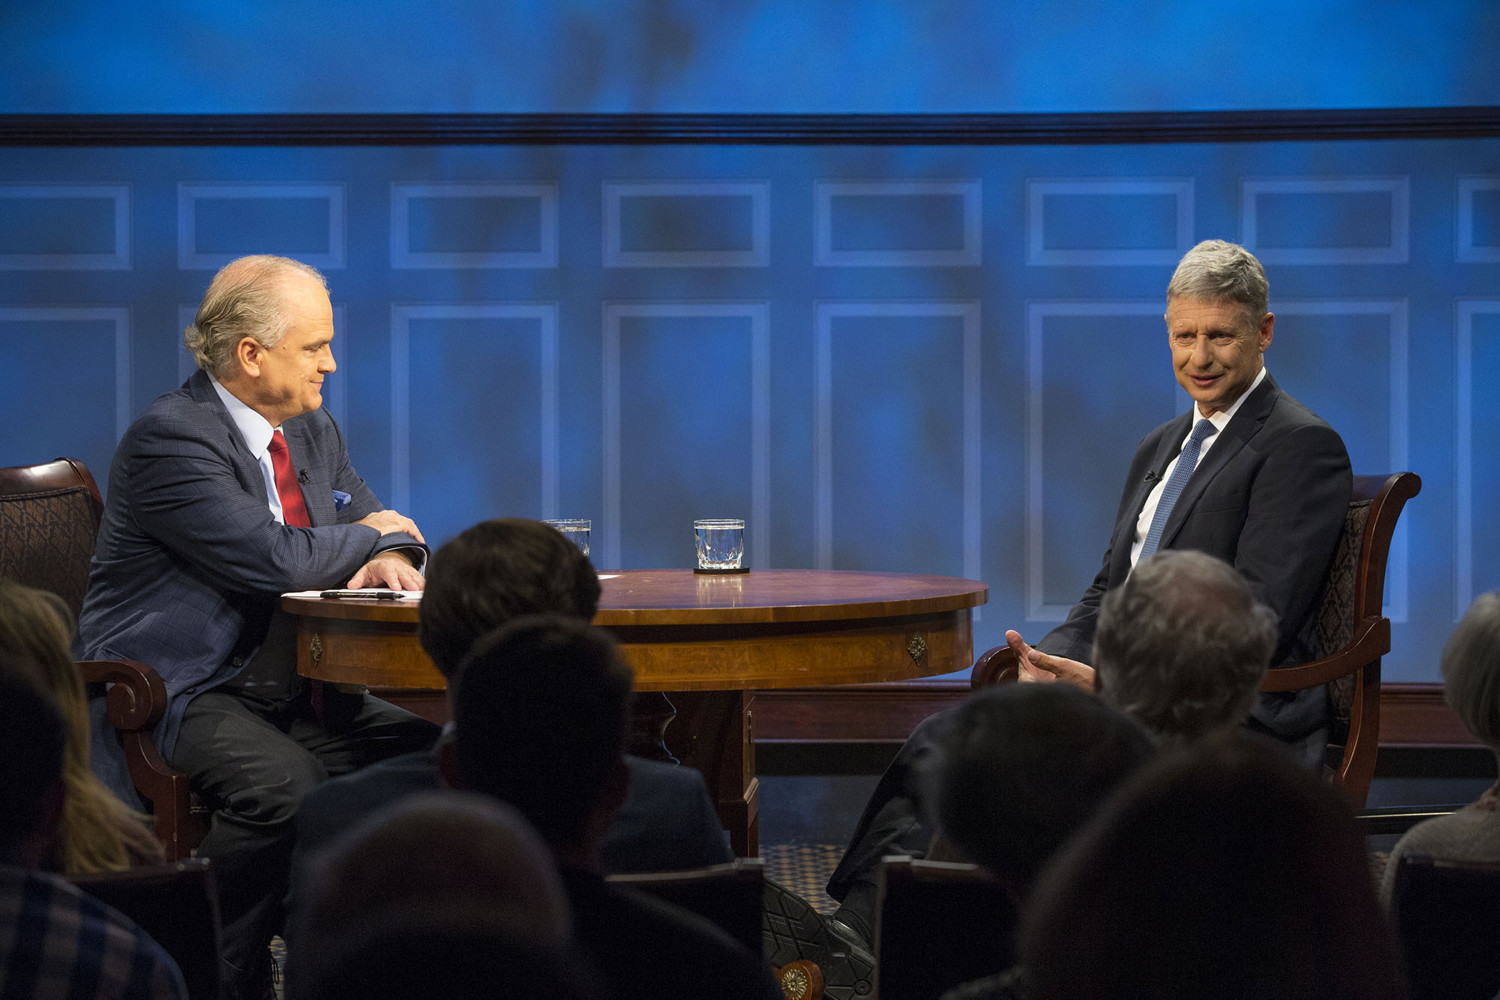 Gary Johnson, right, talking to an audience on stage